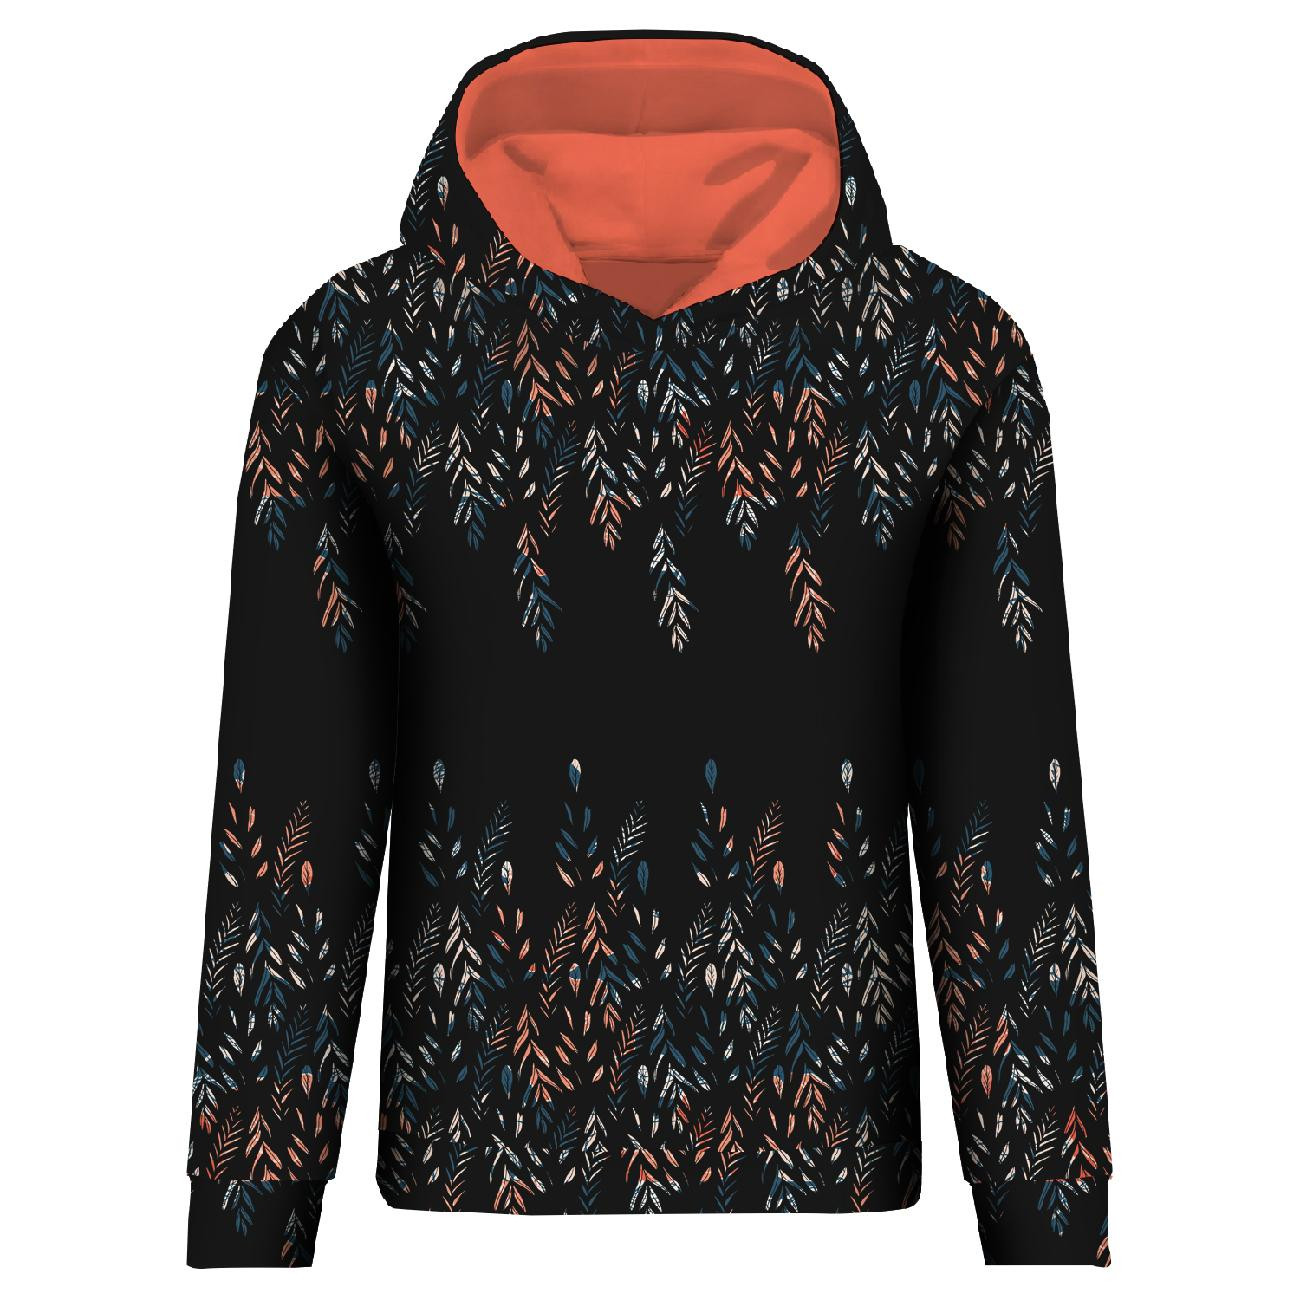 CLASSIC WOMEN’S HOODIE (POLA) - LEAVES PAT. 3 / BLACK - looped knit fabric ITY